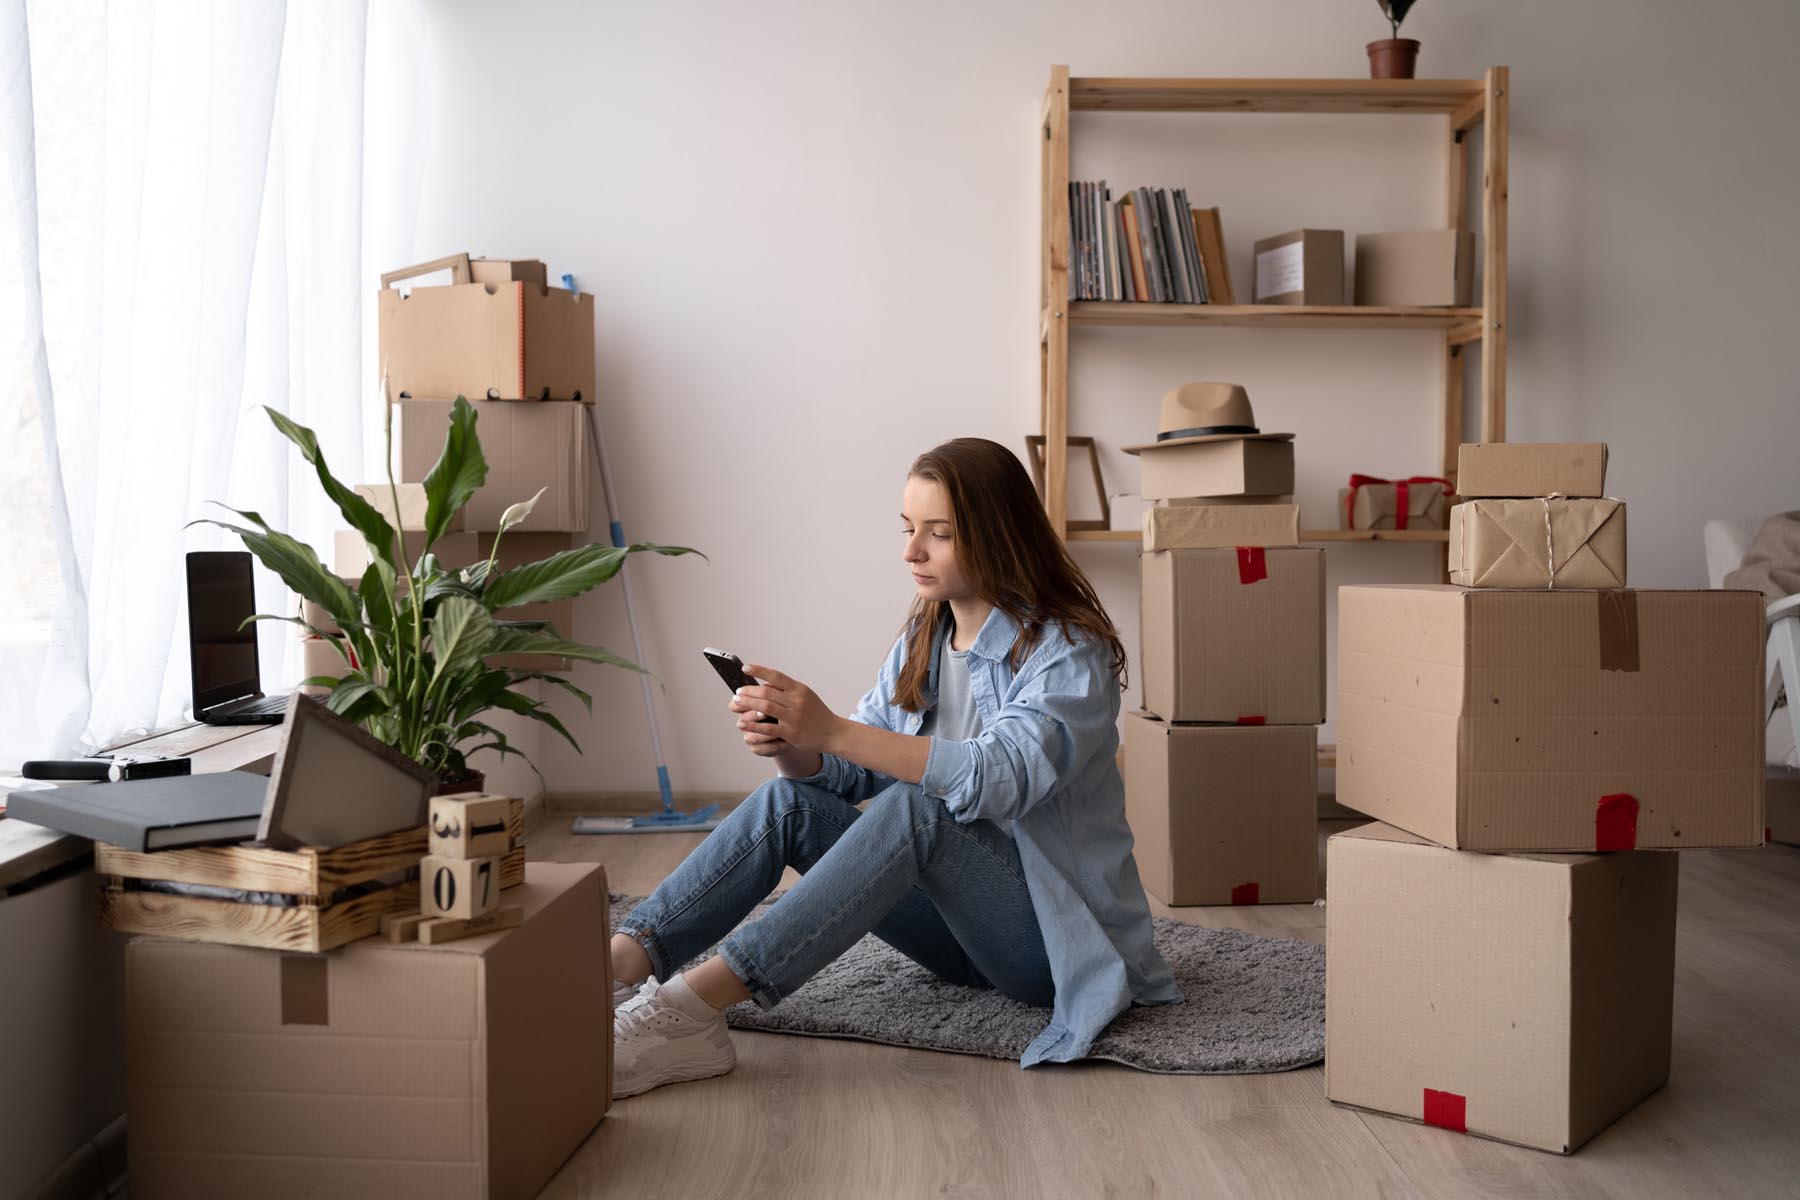 young woman is moving, sitting among cardboard boxes, using a smartphone and smiling, communicate via smartphone after moving to dorm